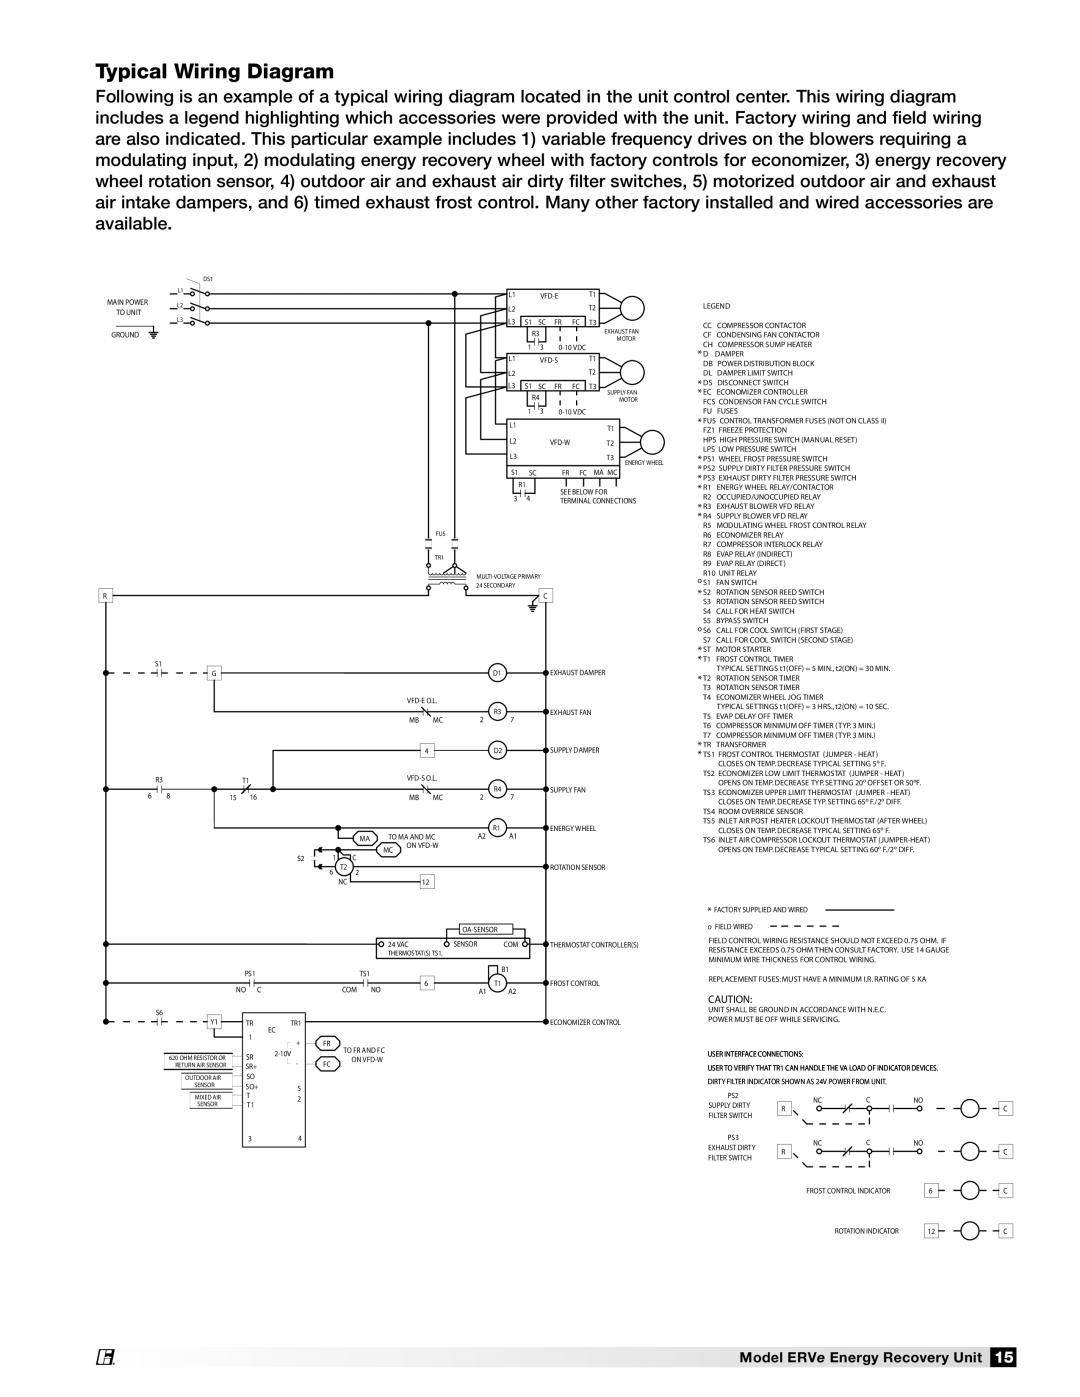 Greenheck Fan manual Typical Wiring Diagram, Model ERVe Energy Recovery Unit 